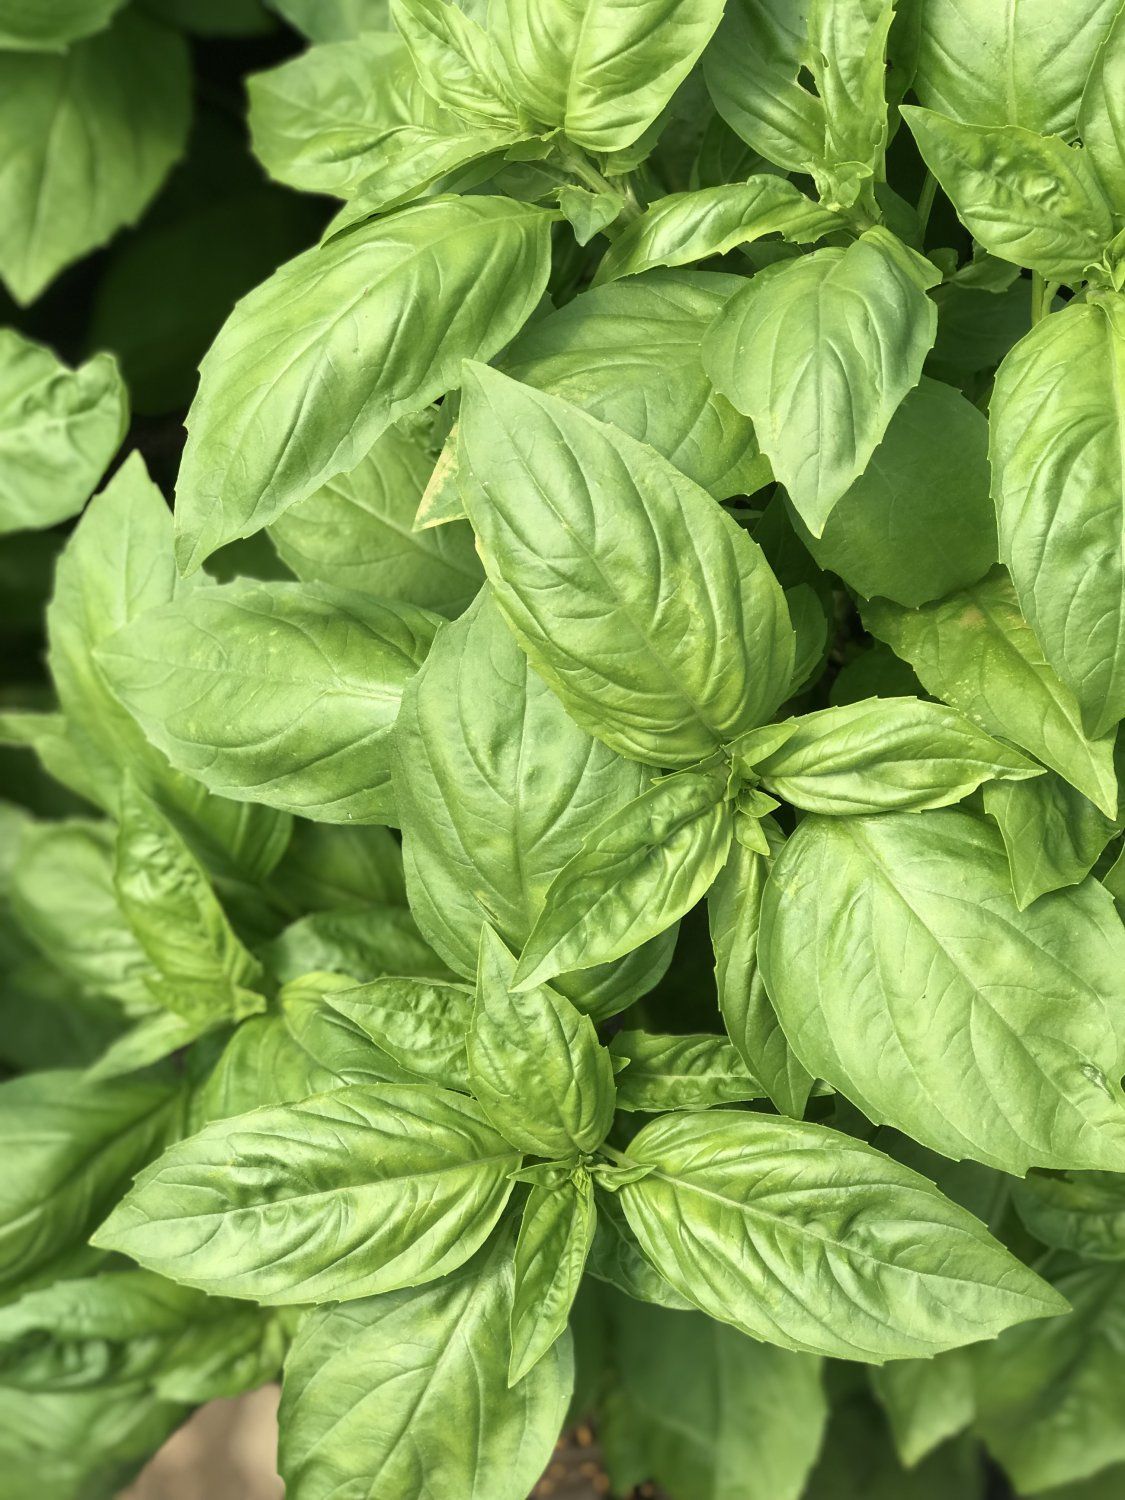 Previous Happening: For the love of Basil